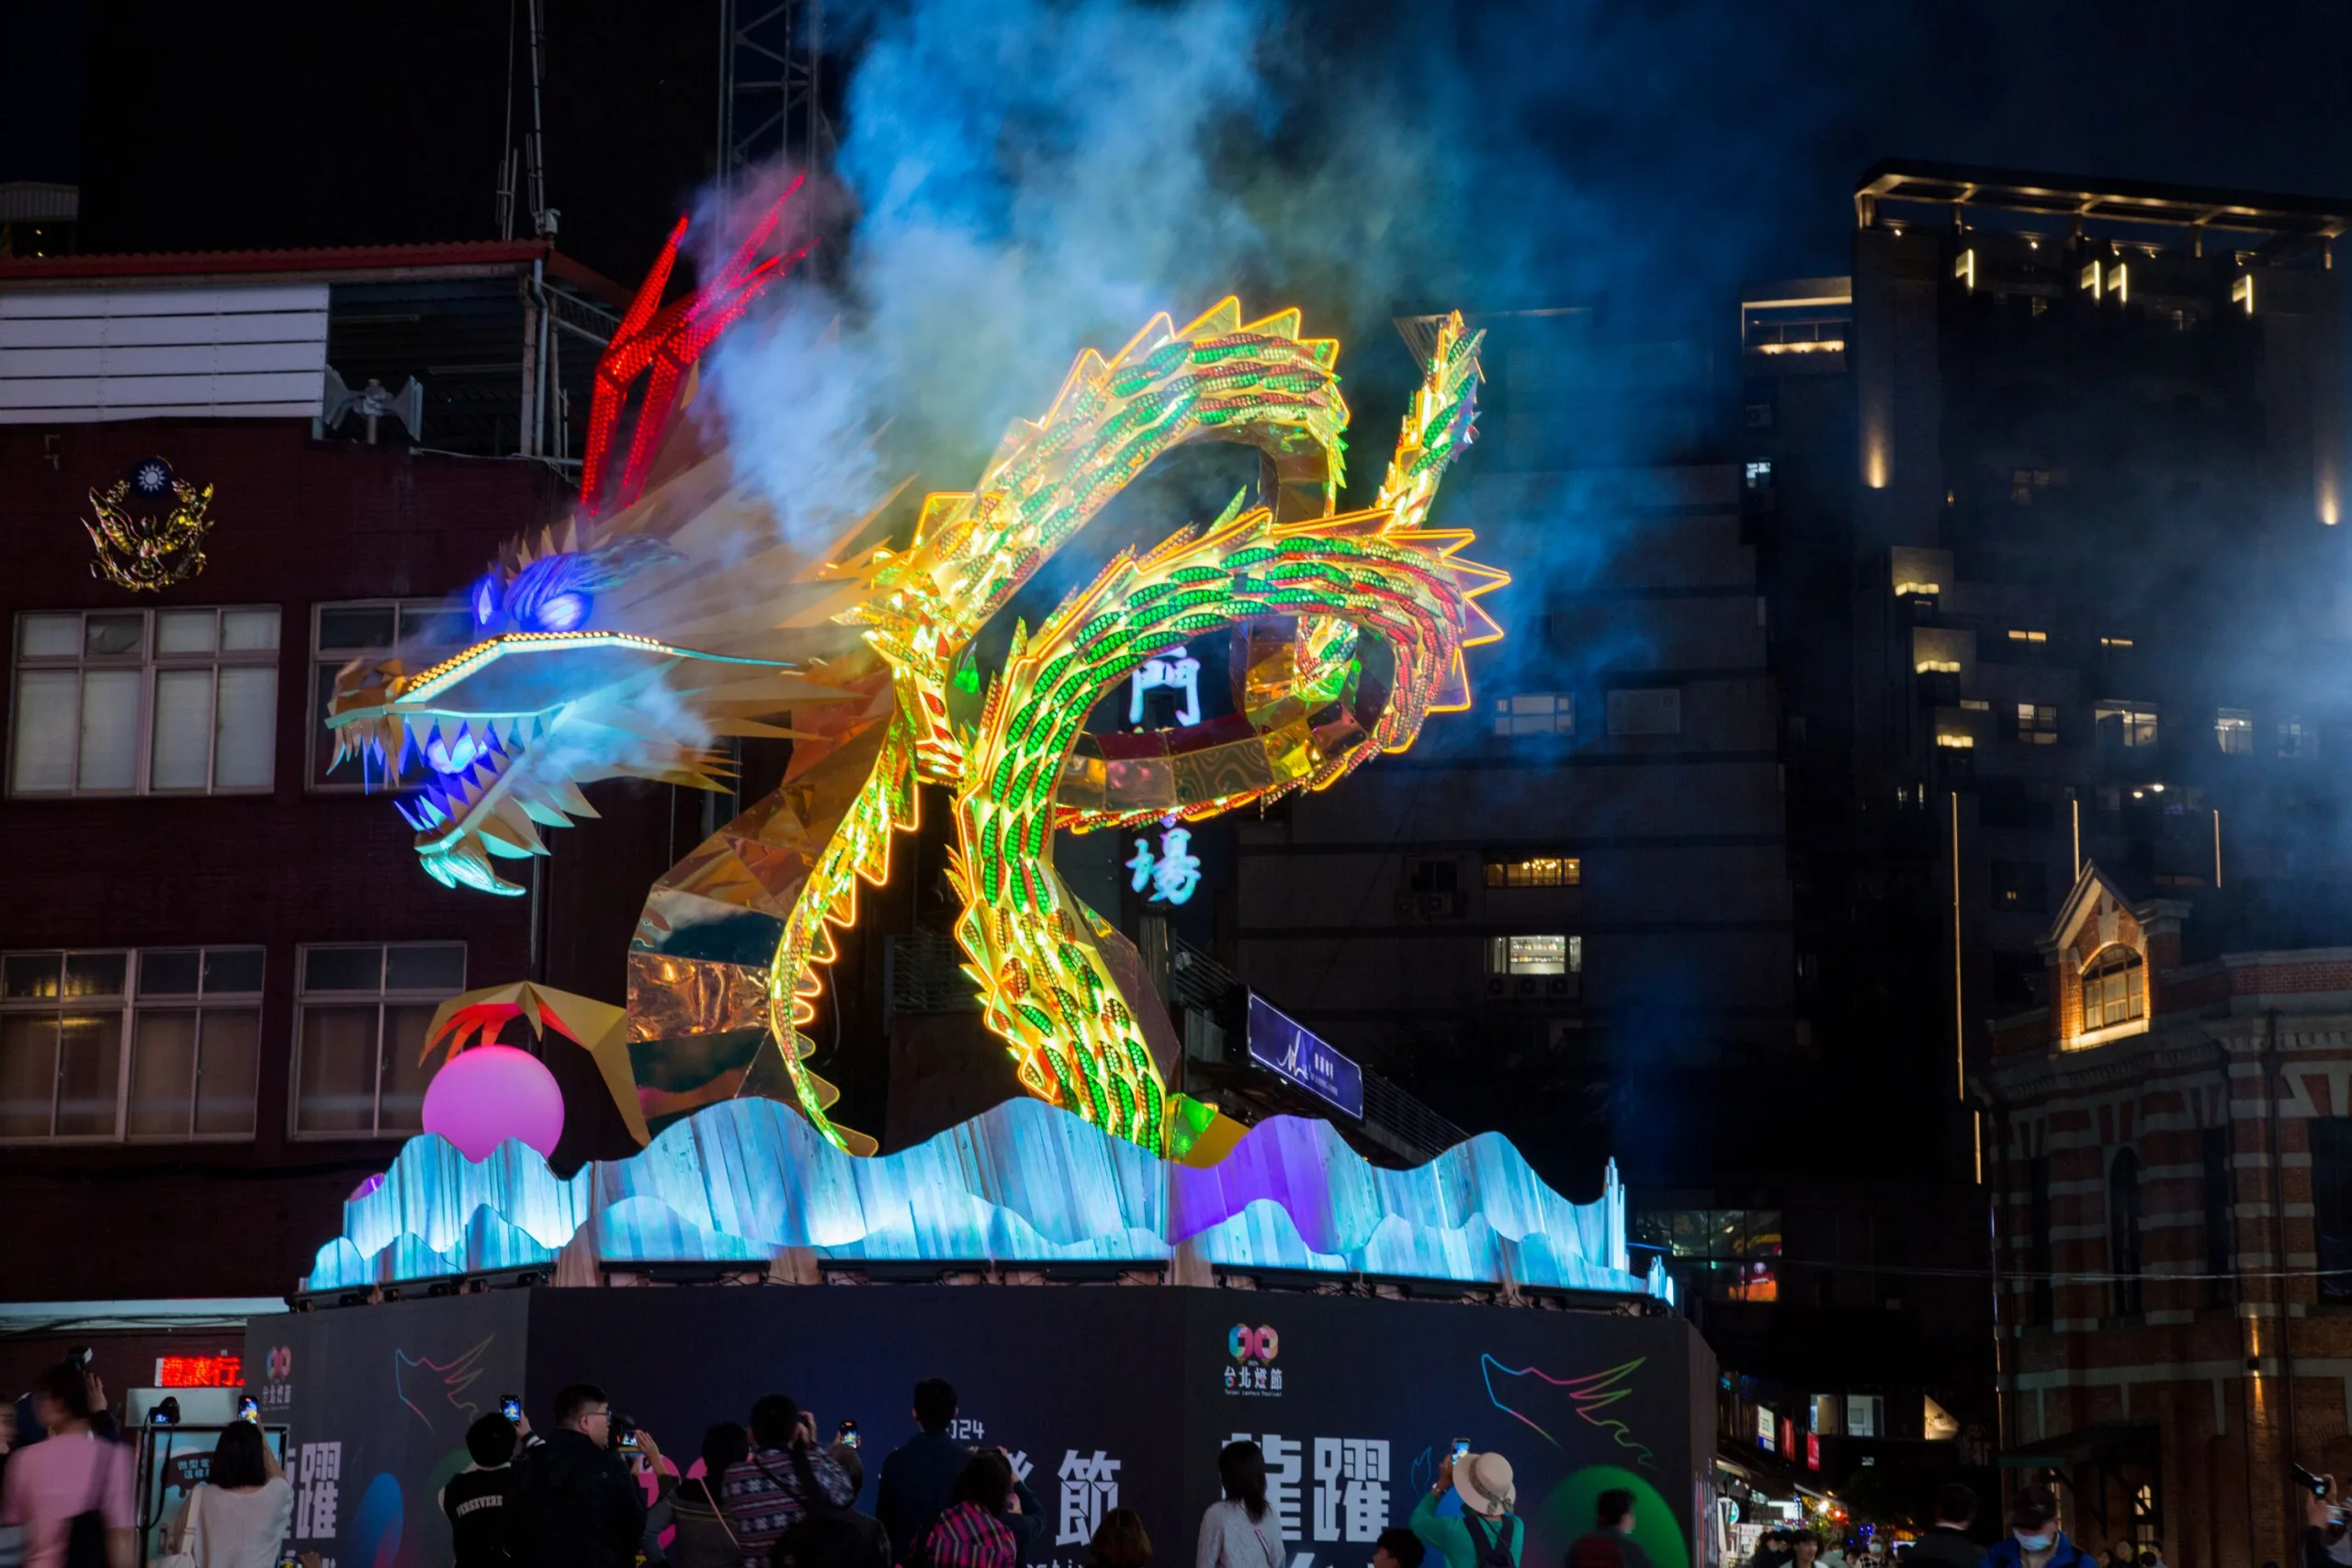 The main lantern at the Taipei Lantern Festival reaches a height of three stories, combining rich variations of light and shadow with a grand musical accompaniment.